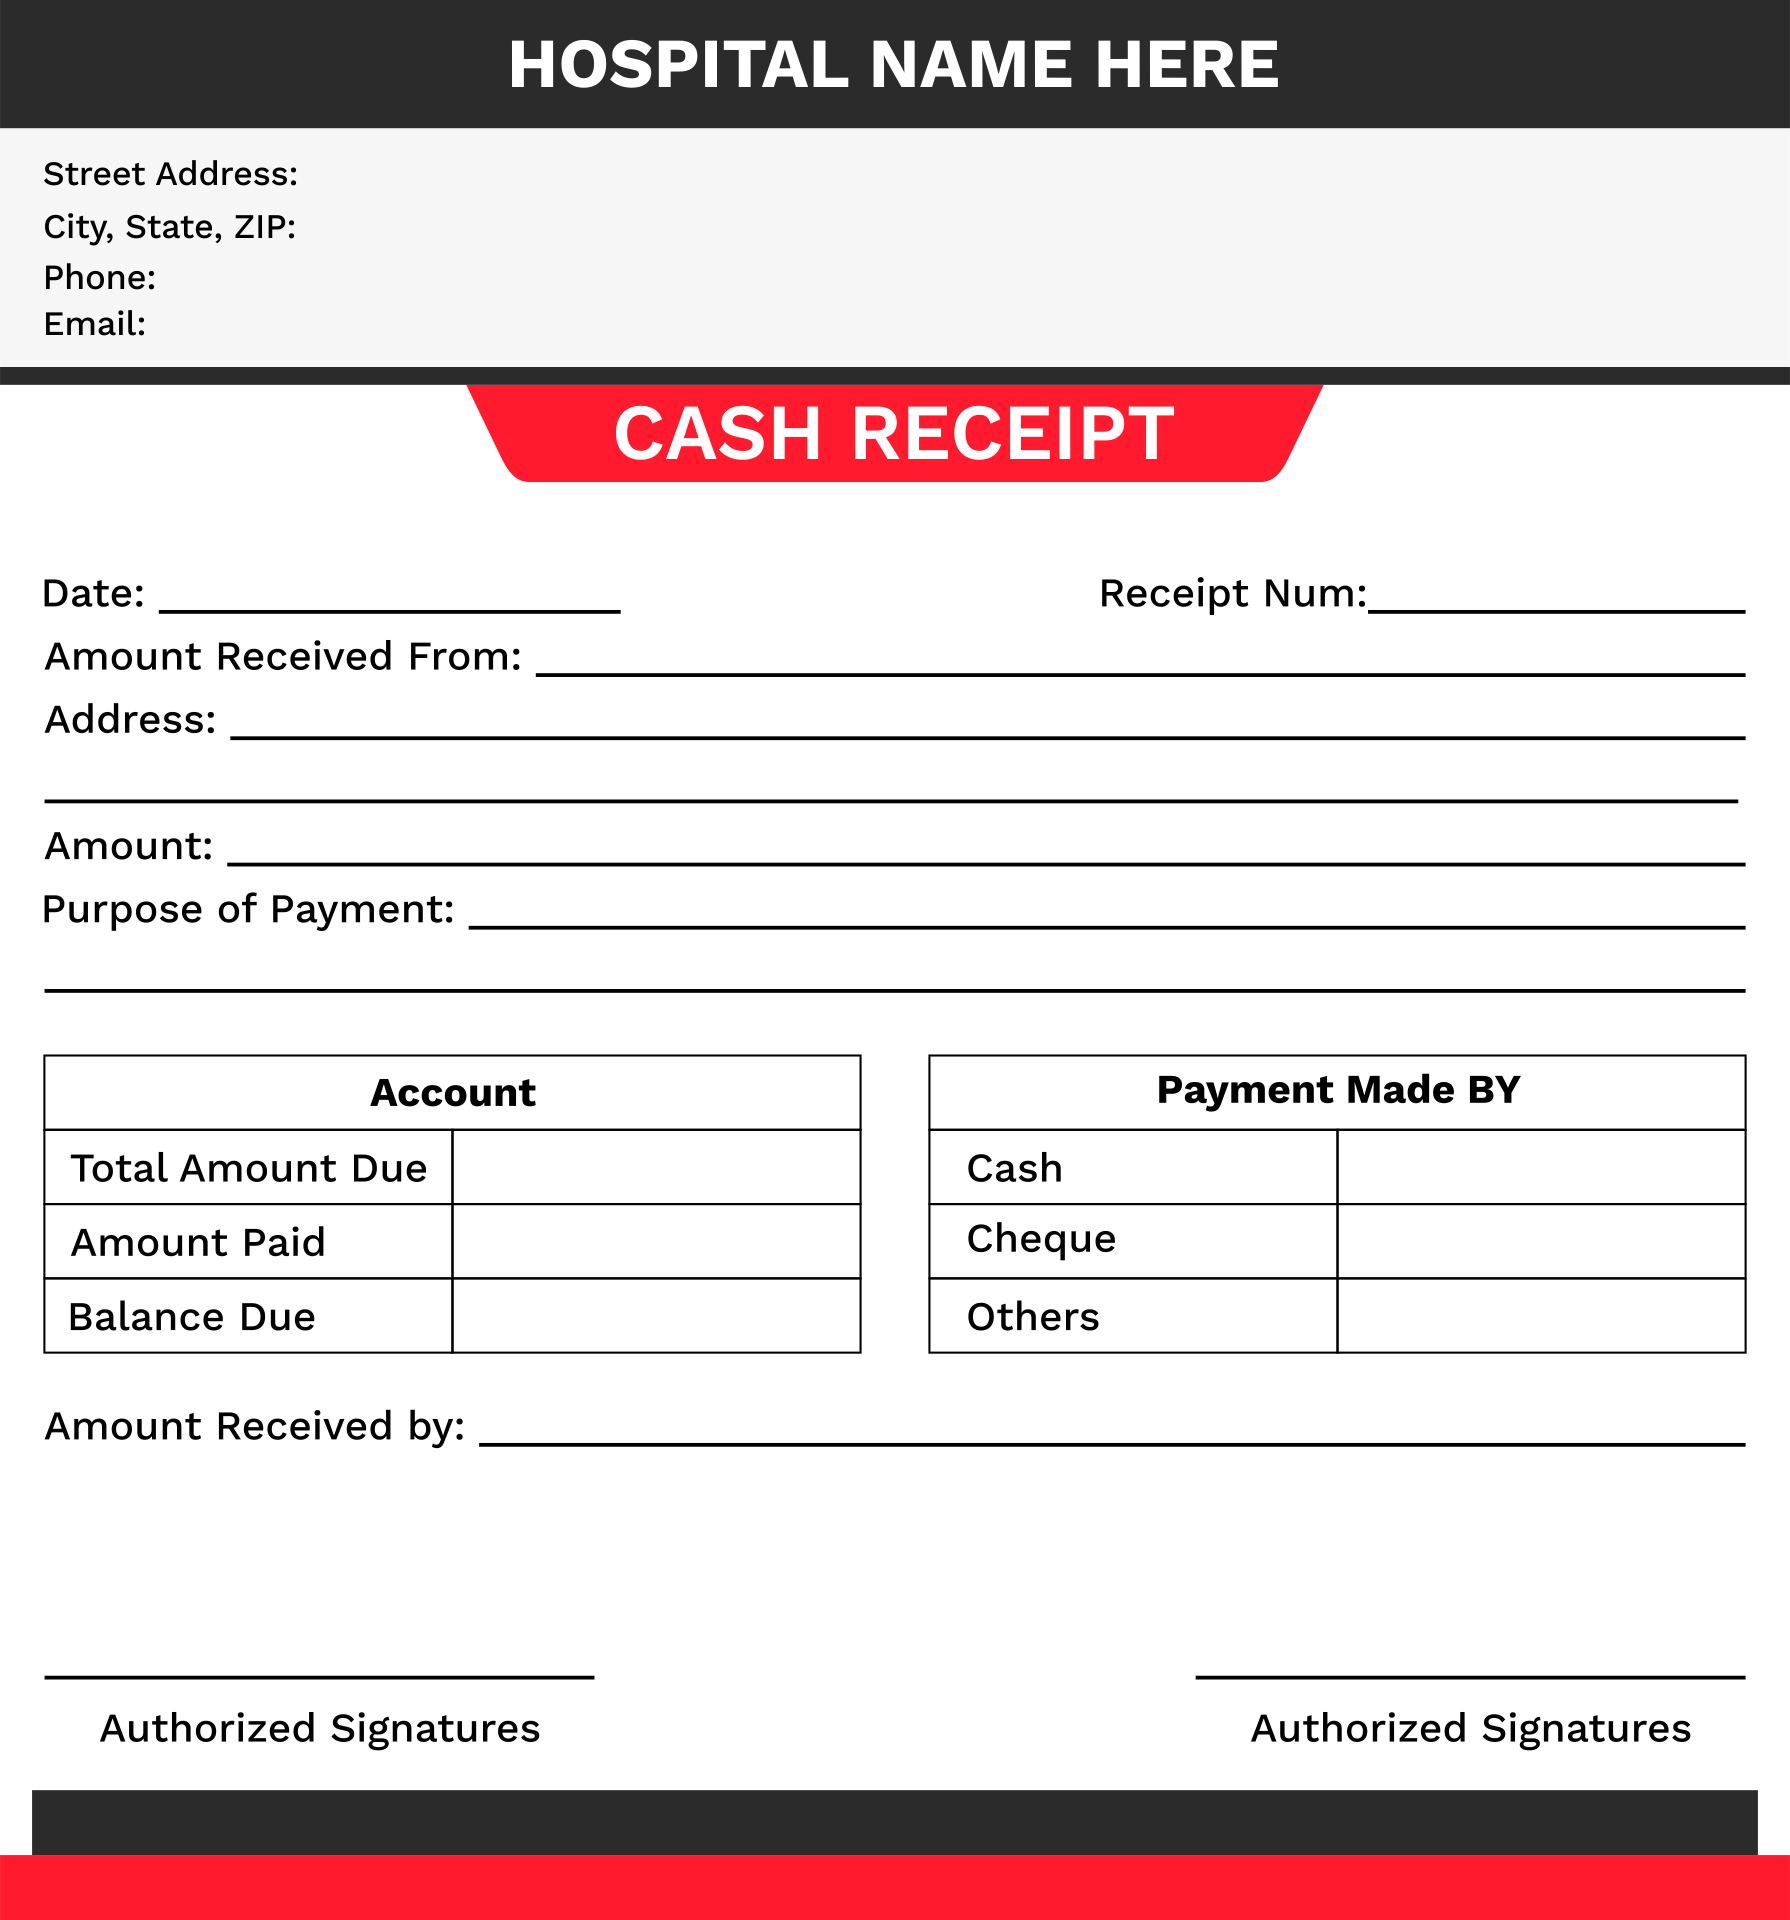 6-best-images-of-printable-medical-receipts-medical-payment-receipt